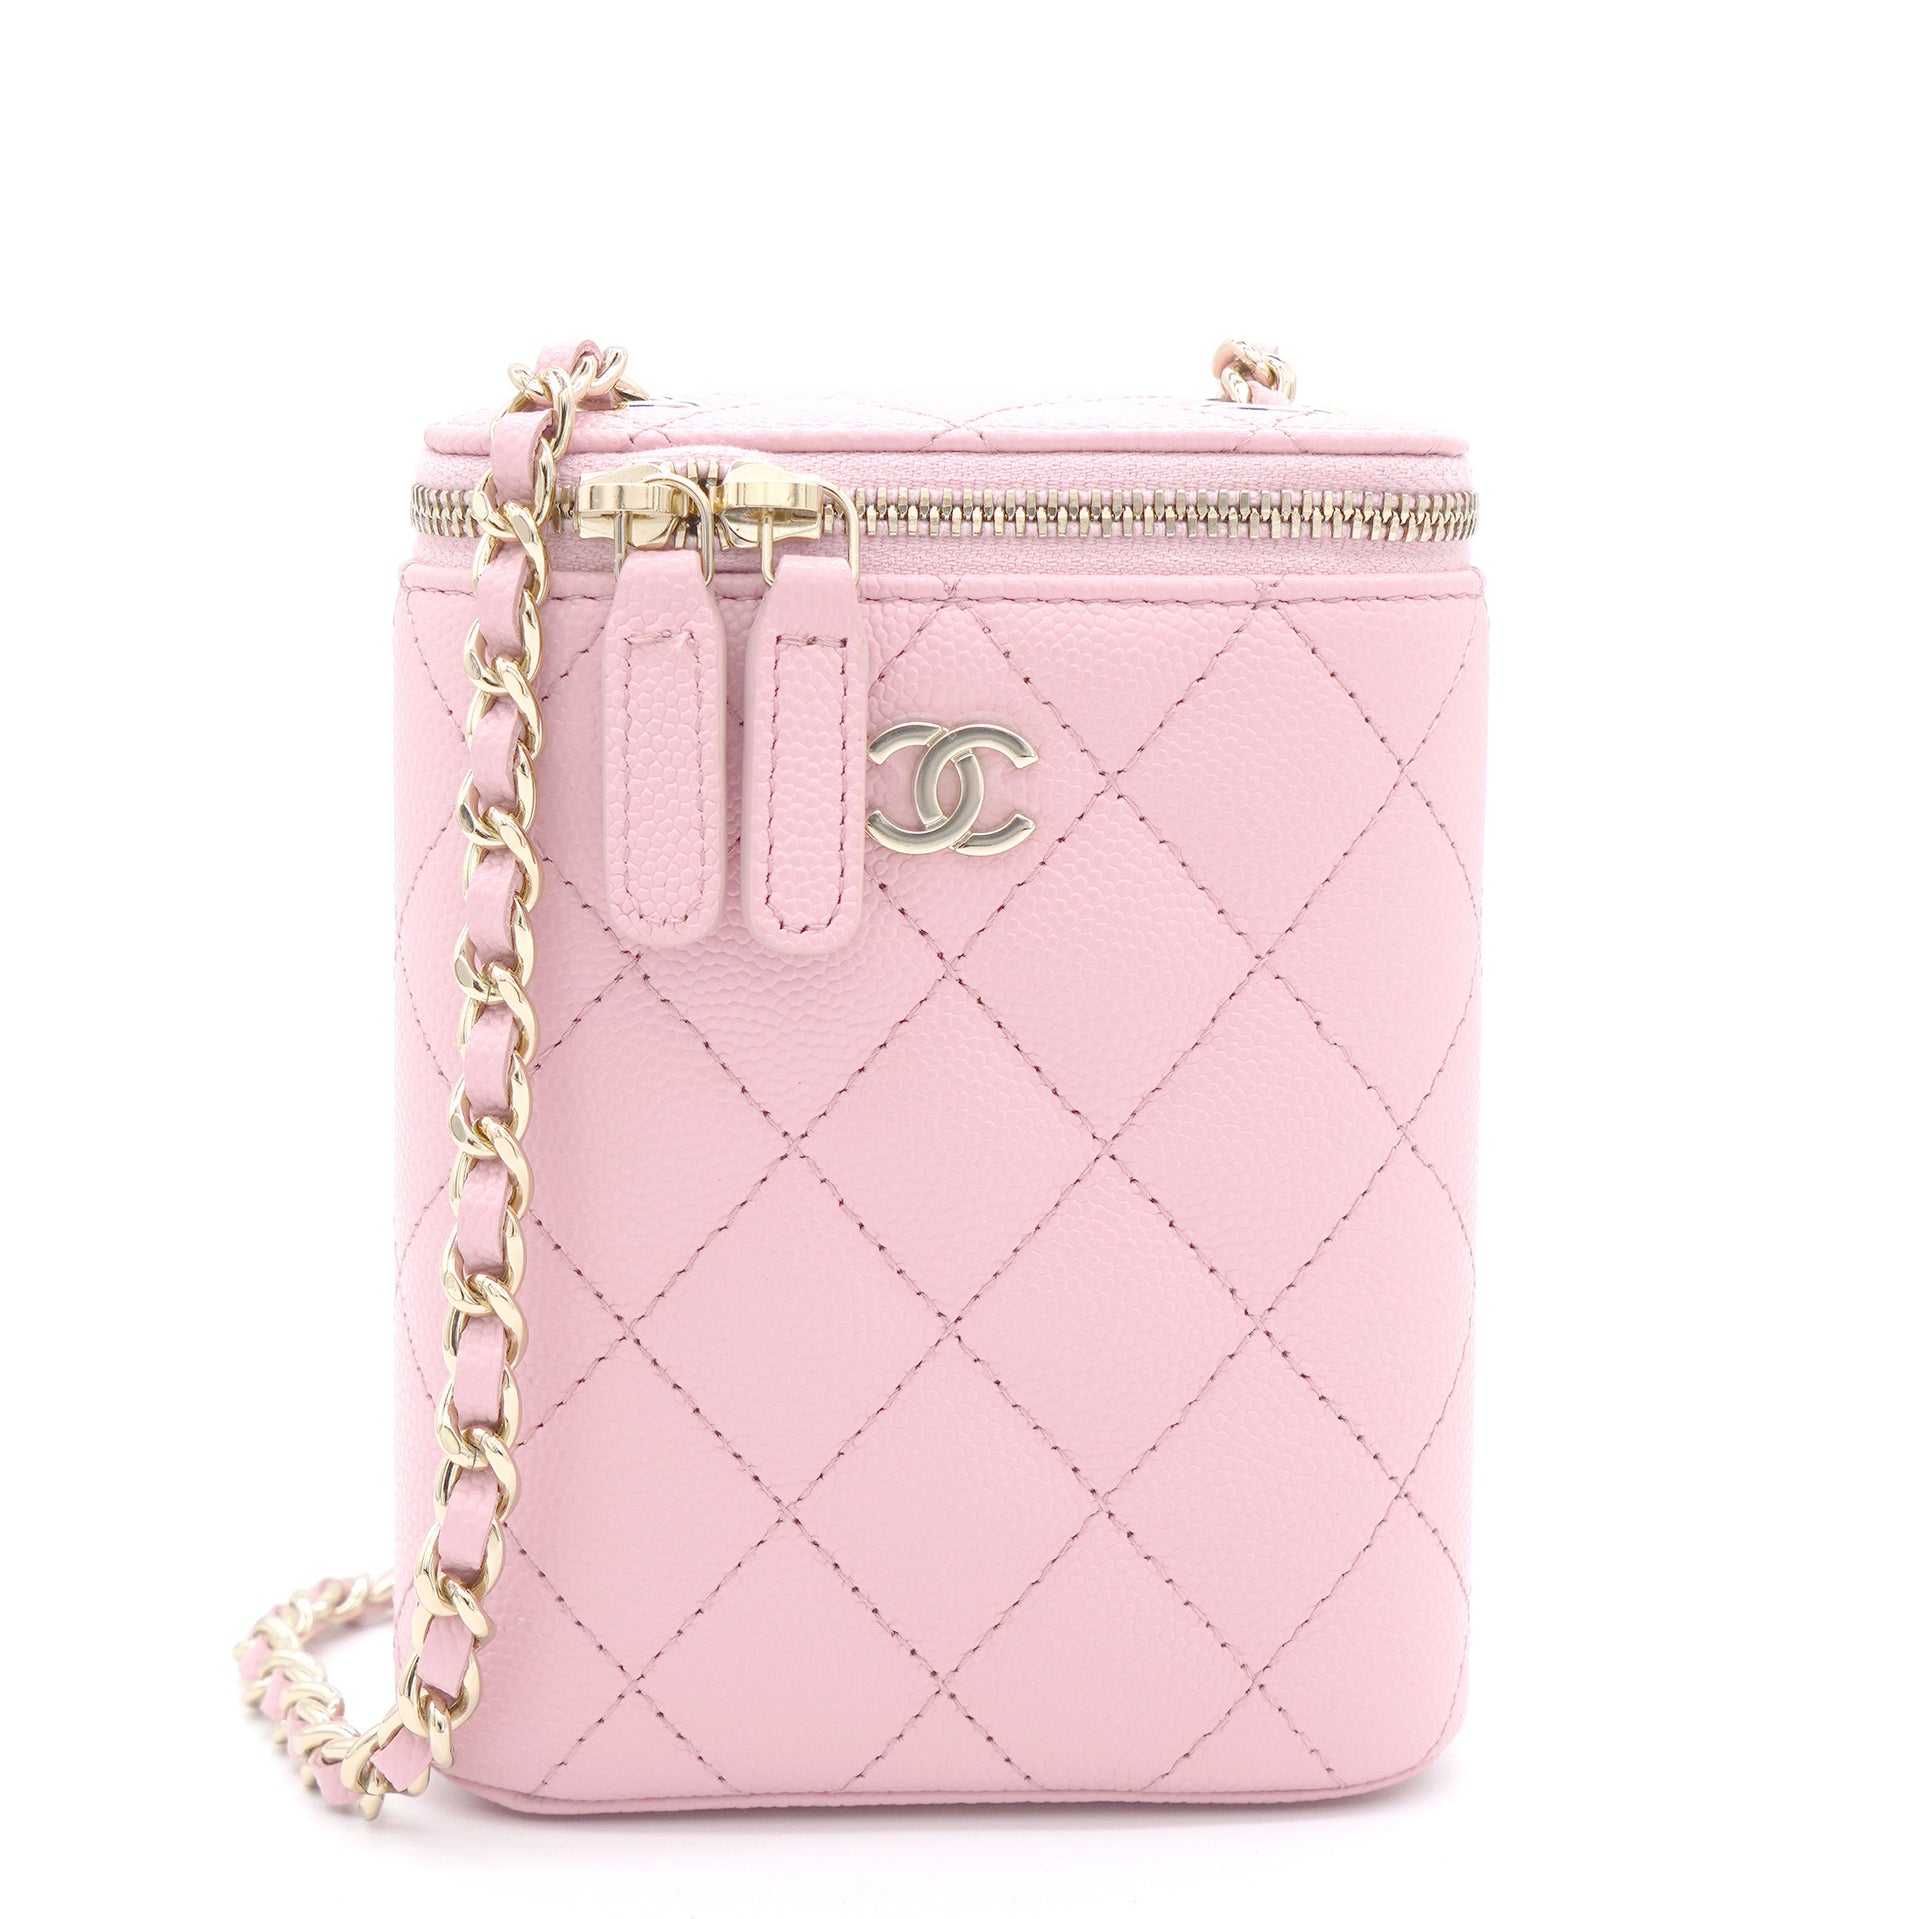 Bonhams : CHANEL LIGHT PINK LAMBSKIN PHONE BAG VANITY CASE WITH GOLD TONED  CHAIN (includes serial sticker, authenticity card, original dust bag and box )